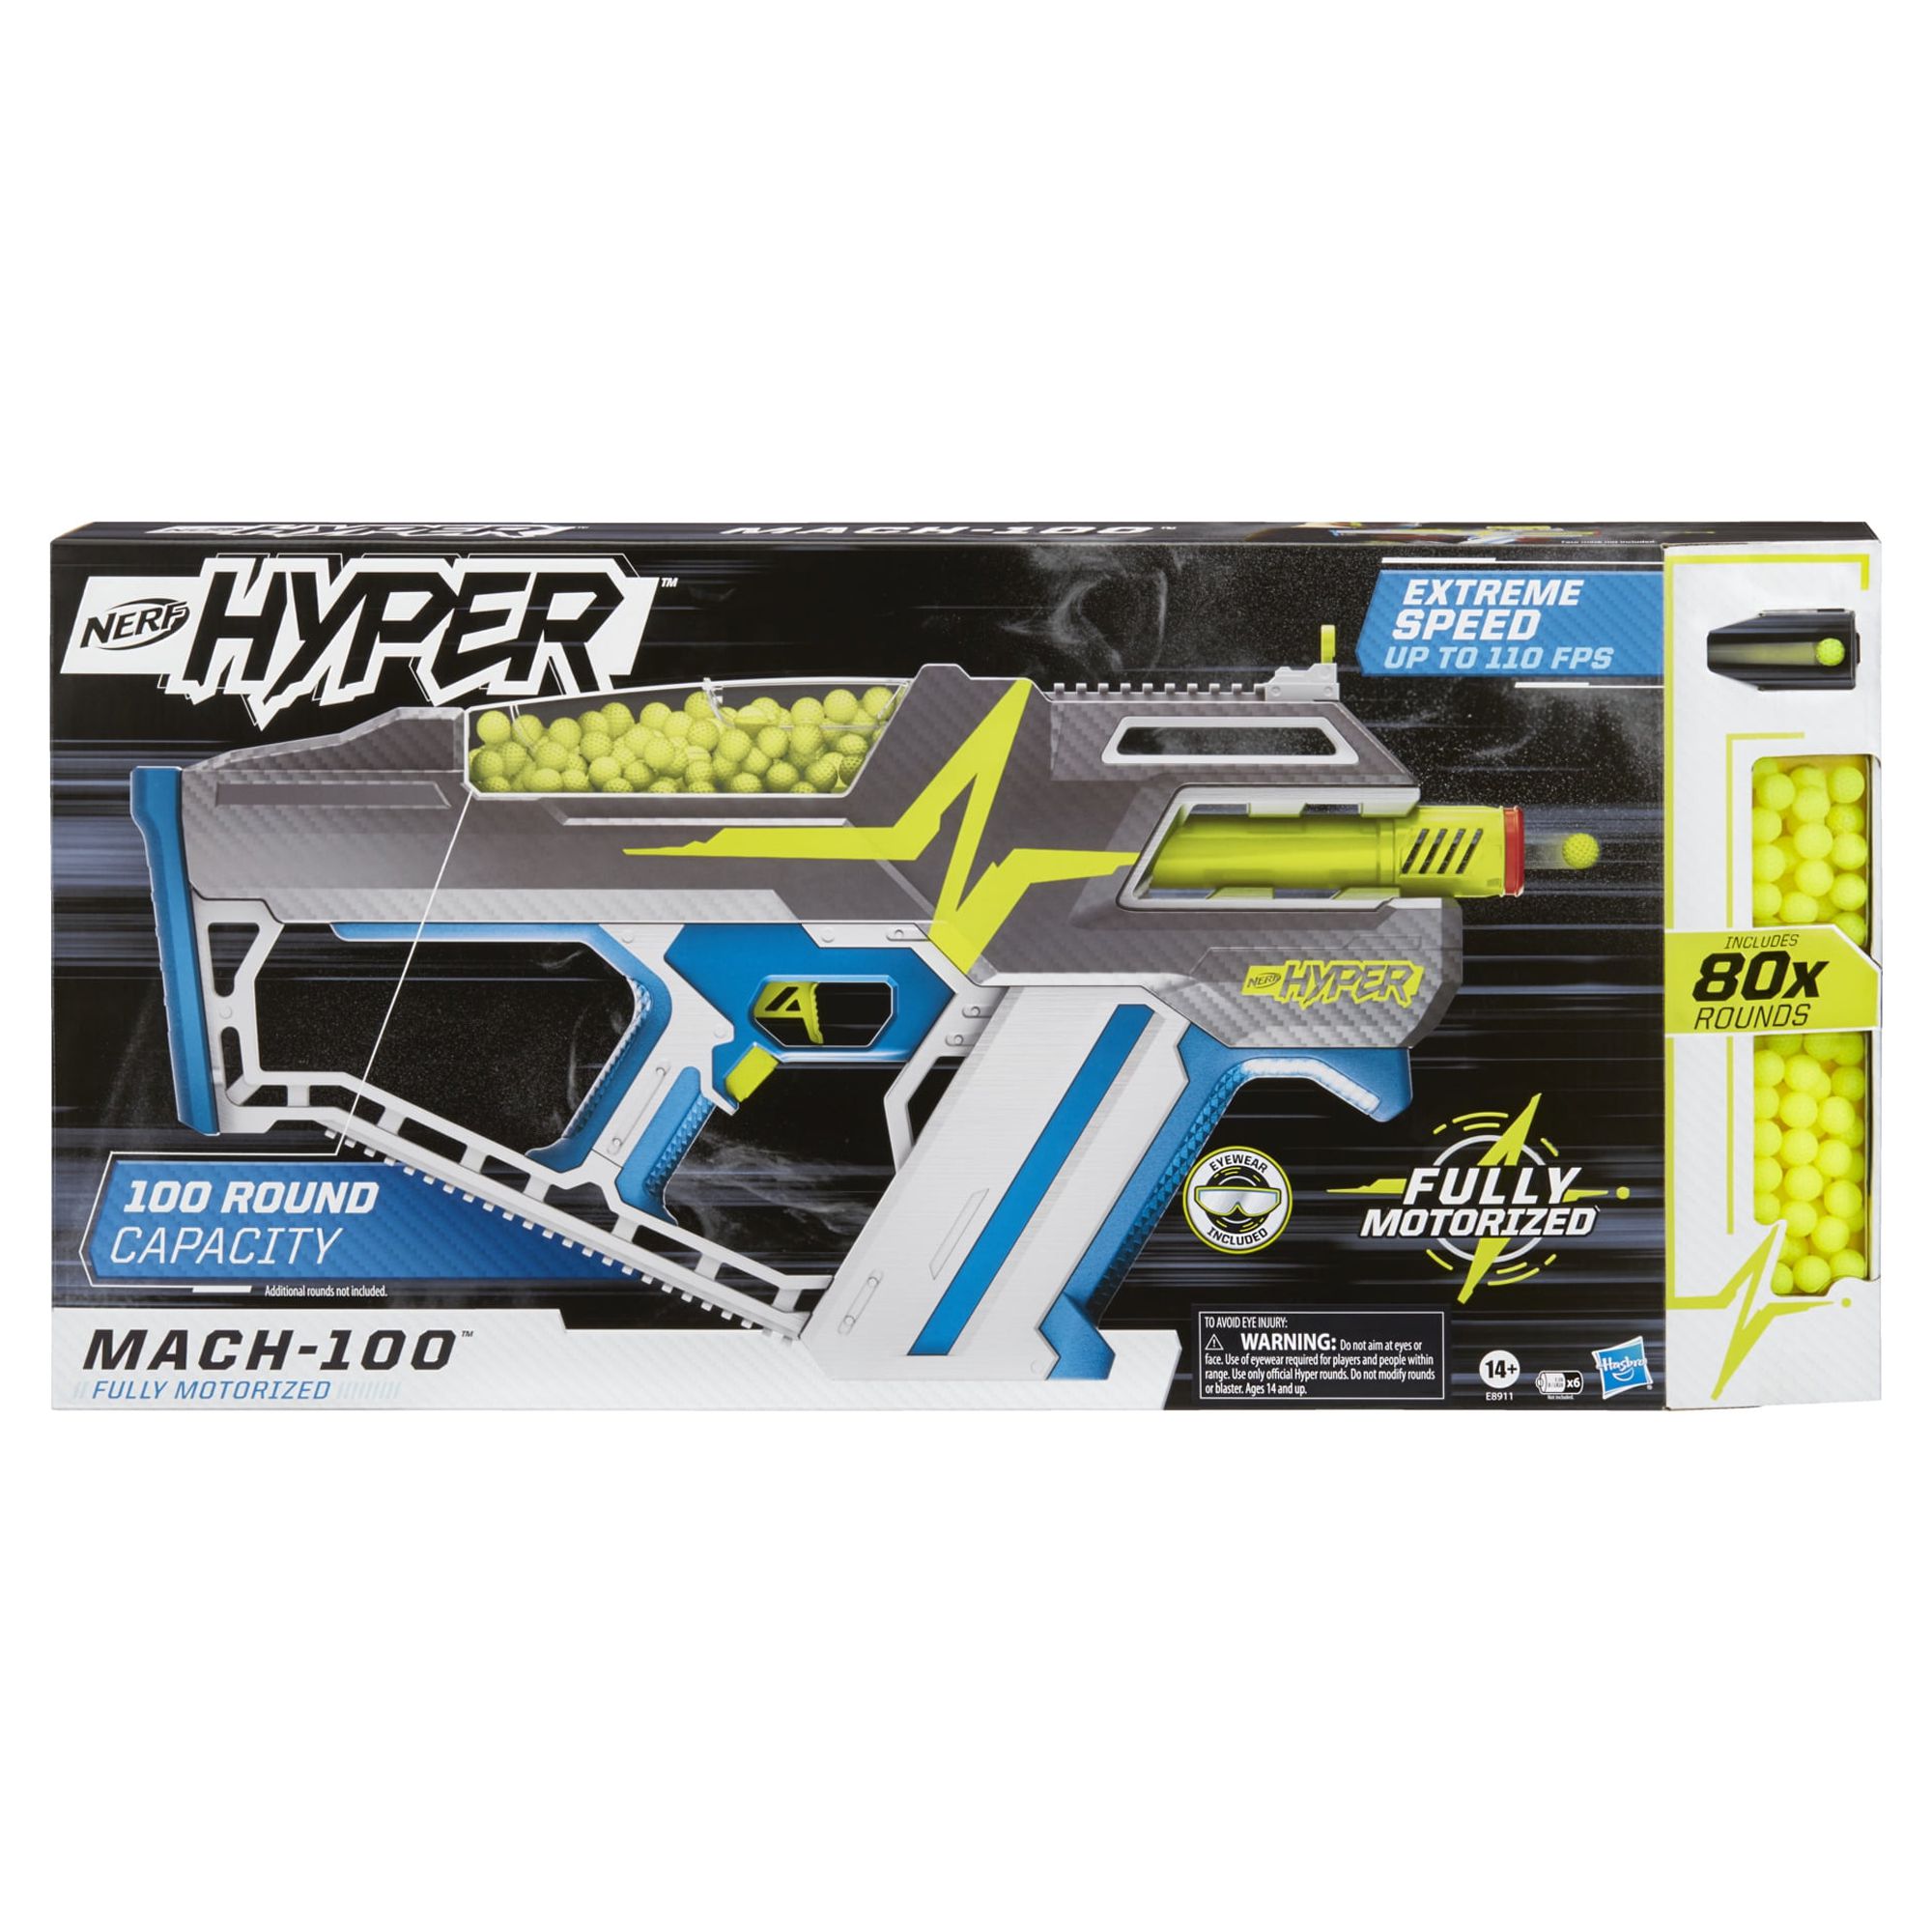 Nerf Hyper Mach-100 Fully Motorized Blaster, 80 Nerf Hyper Rounds Included, Ages 14+ - image 1 of 11